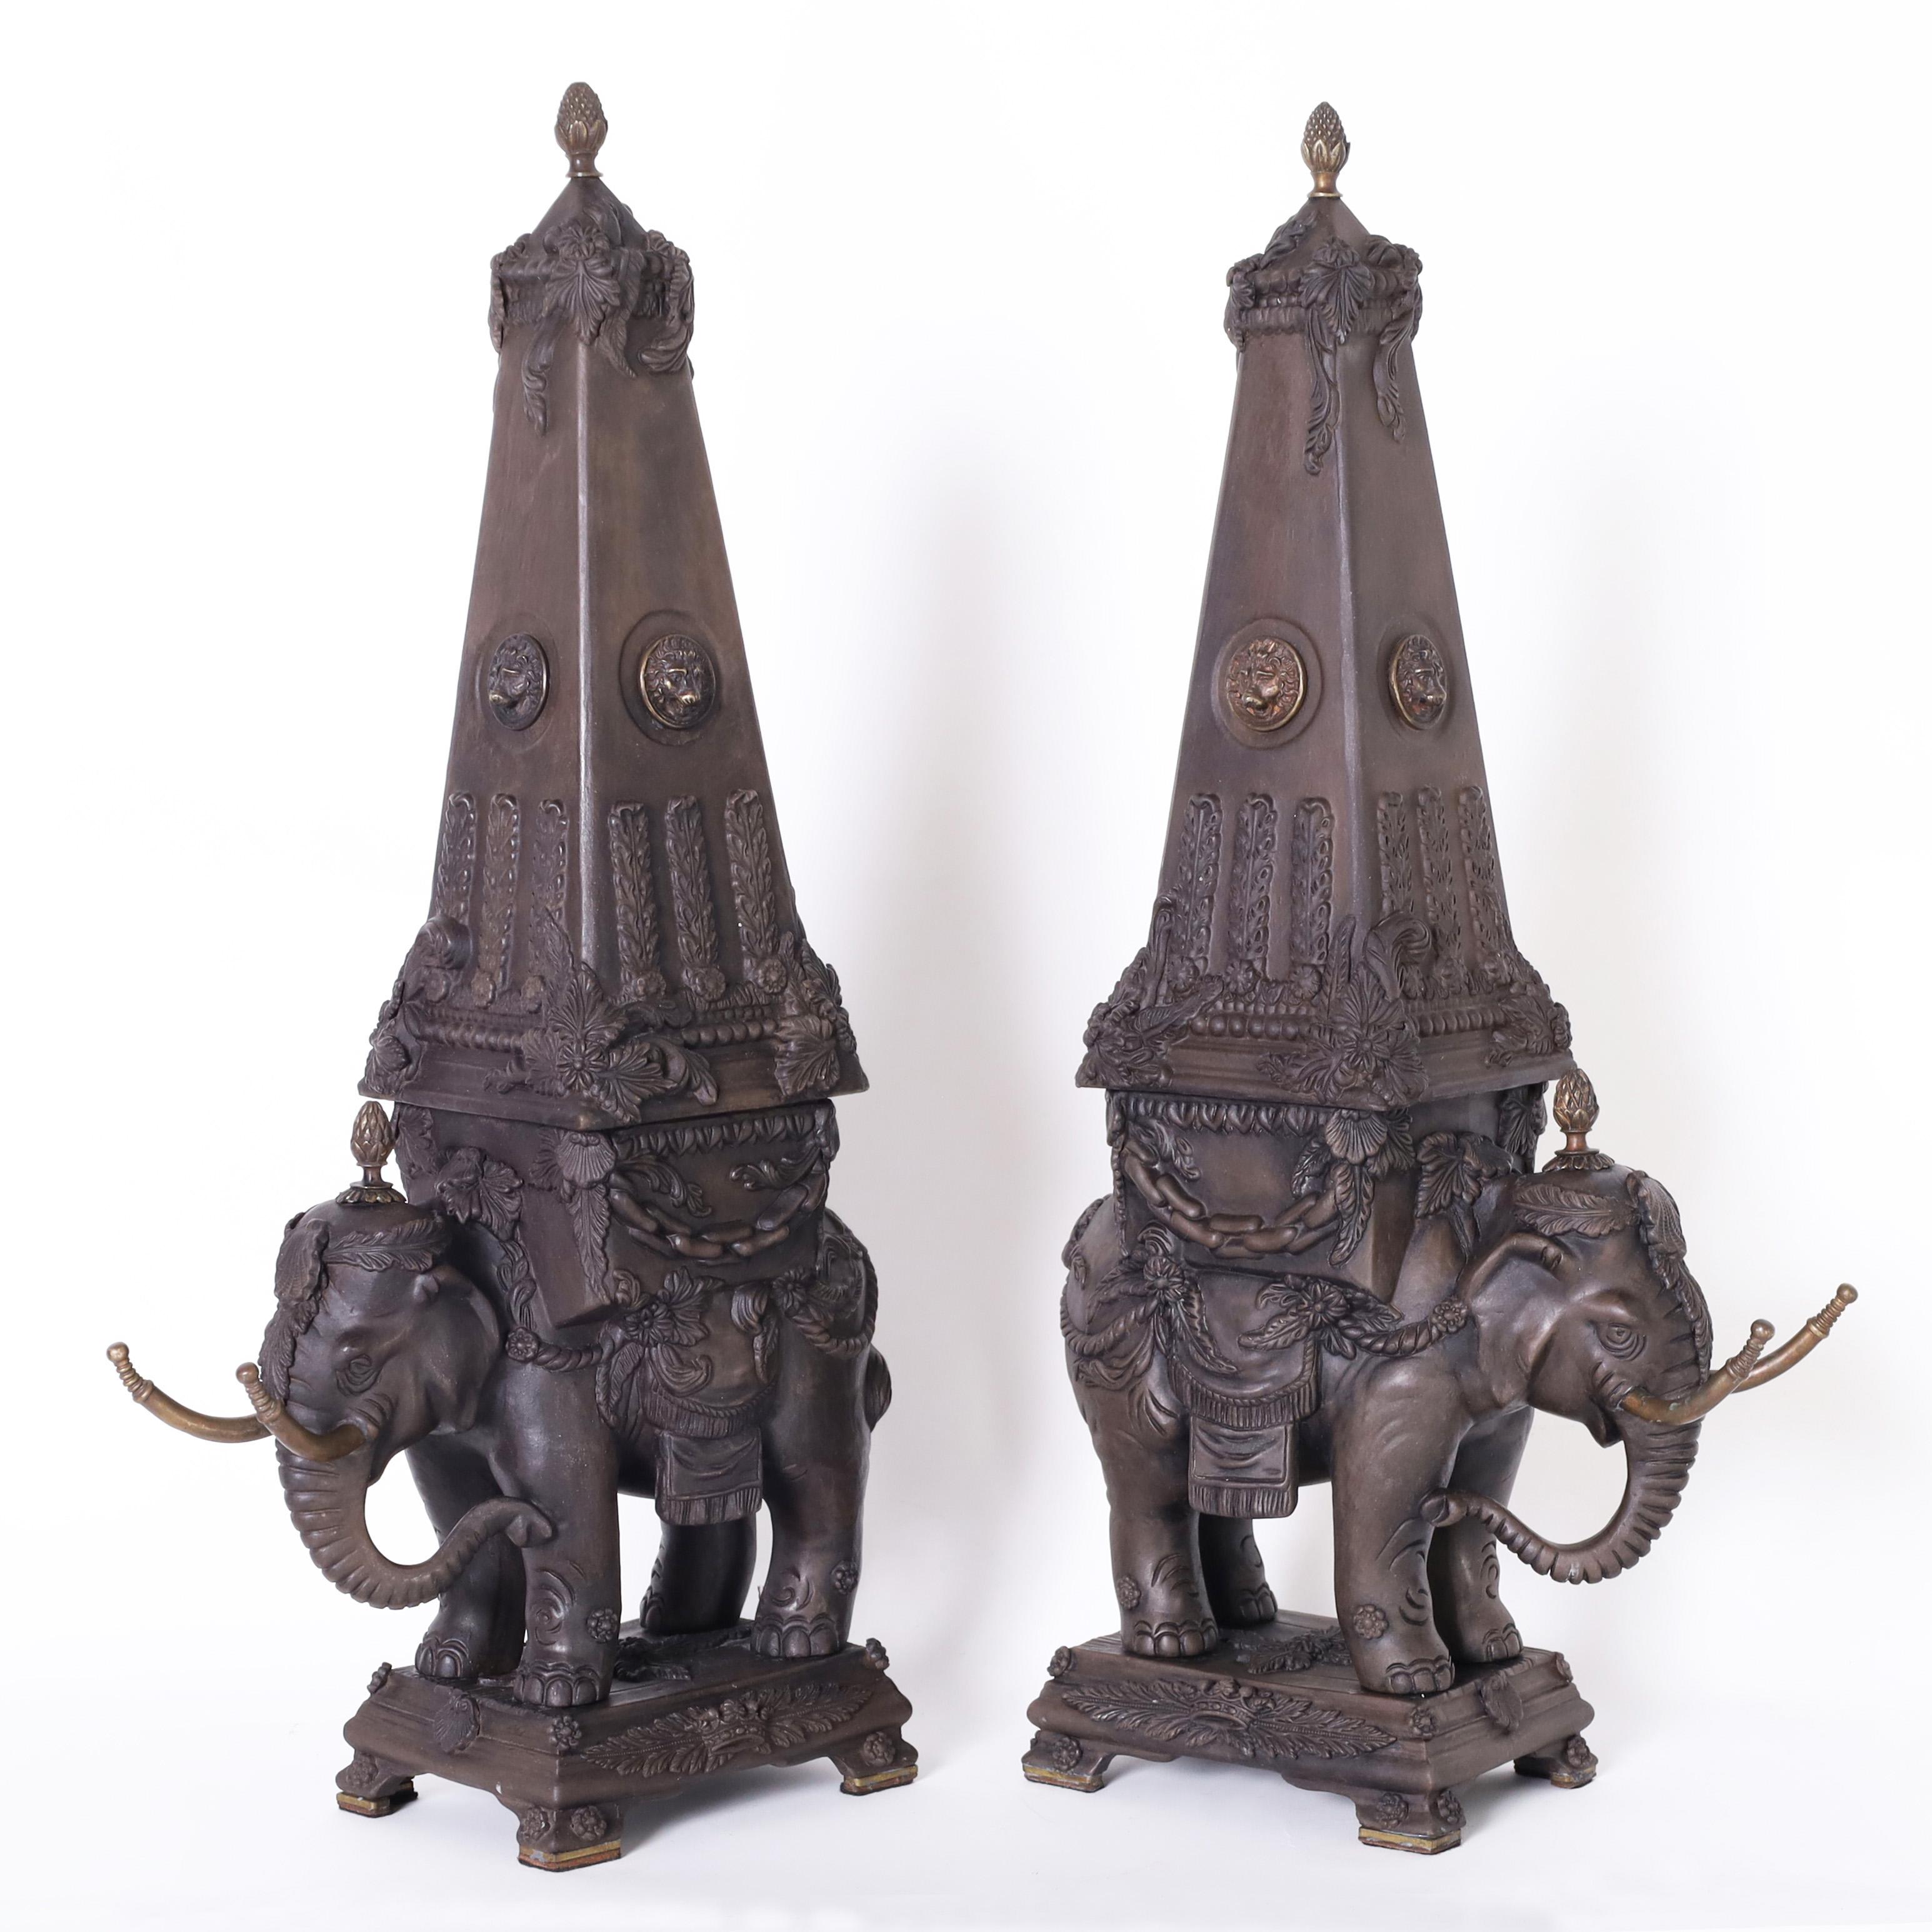 Vintage pair of Italian neoclassic garnitures or objects of art depicting elephants carrying obelisks, crafted in ceramic or earthenware with a bisque finish and highlighted with bronze finials, lion heads and tusks.